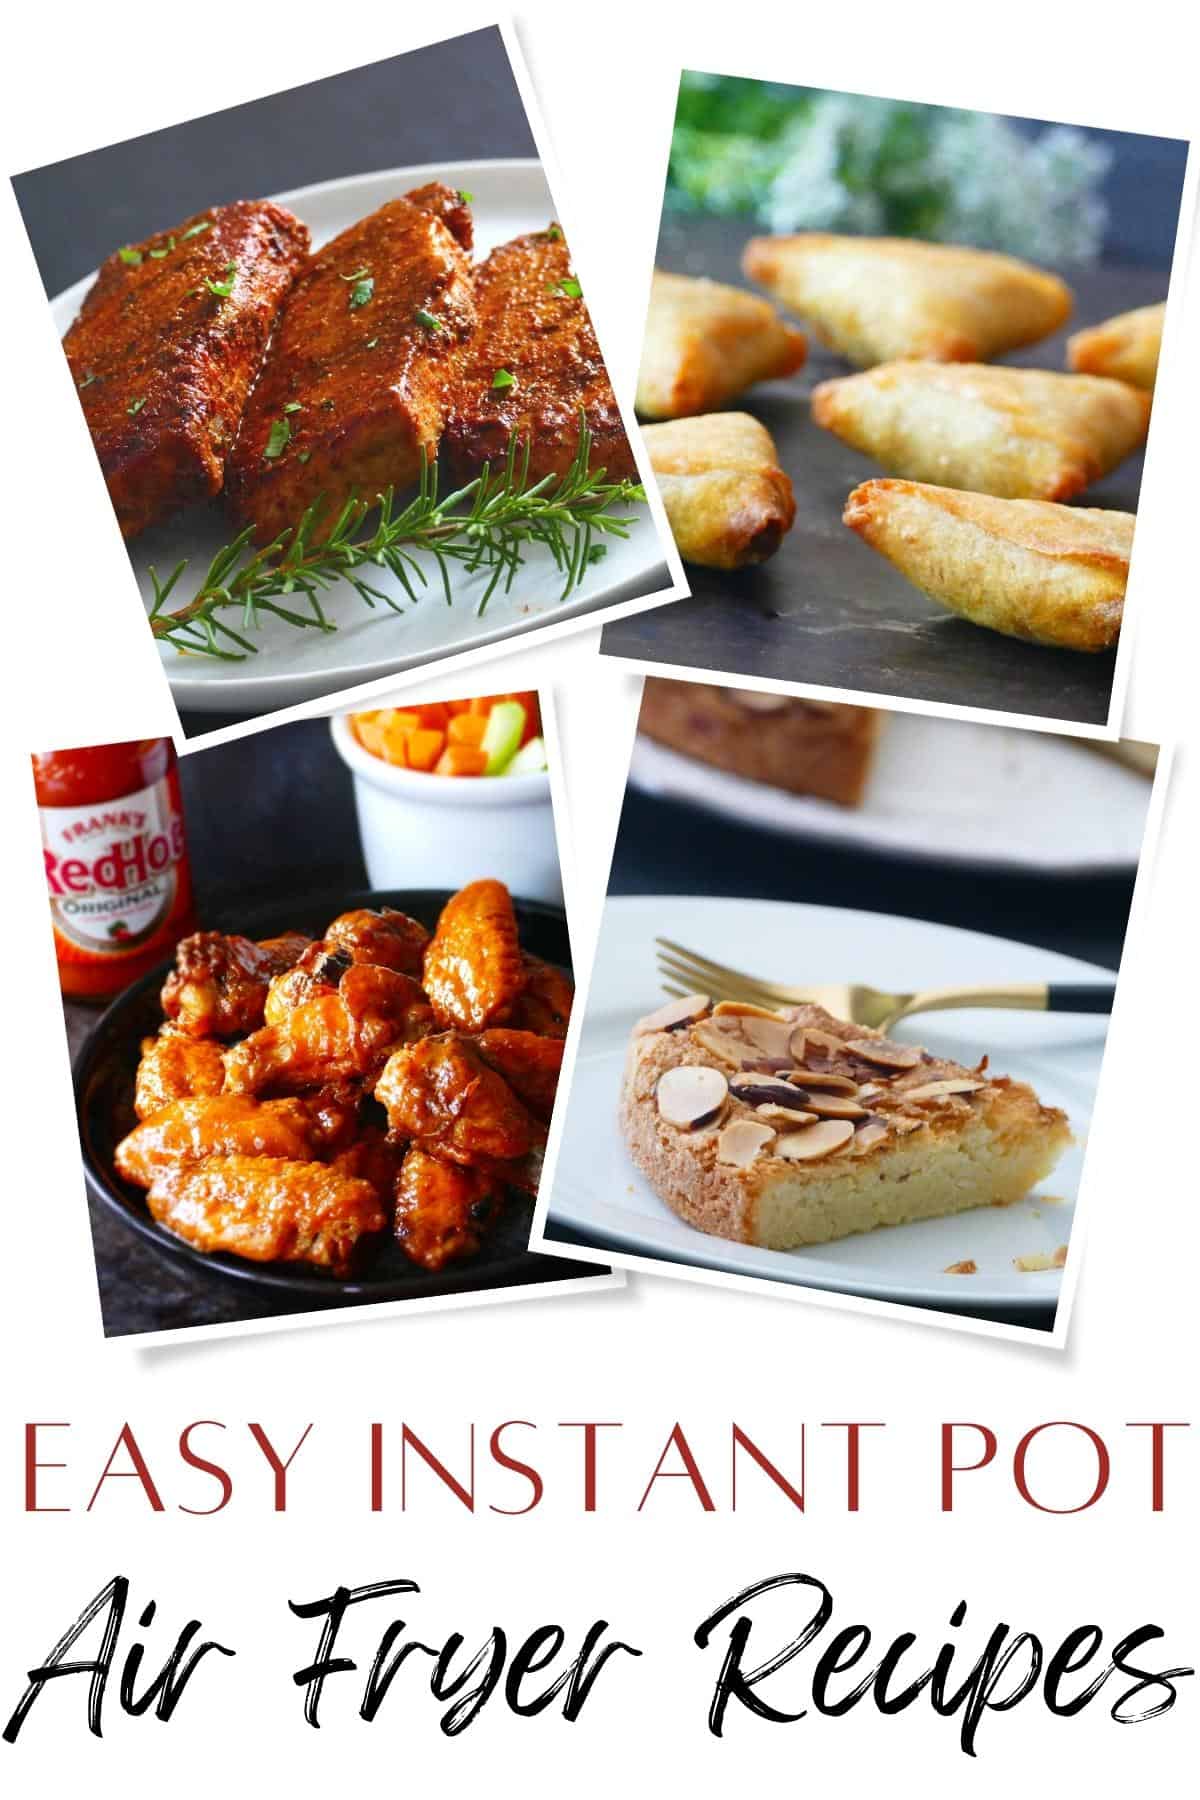 Instant Pot air fryer recipes - collage of pork chops, samosas, chicken wings and almond cake - easy instant pot air fryer recipes